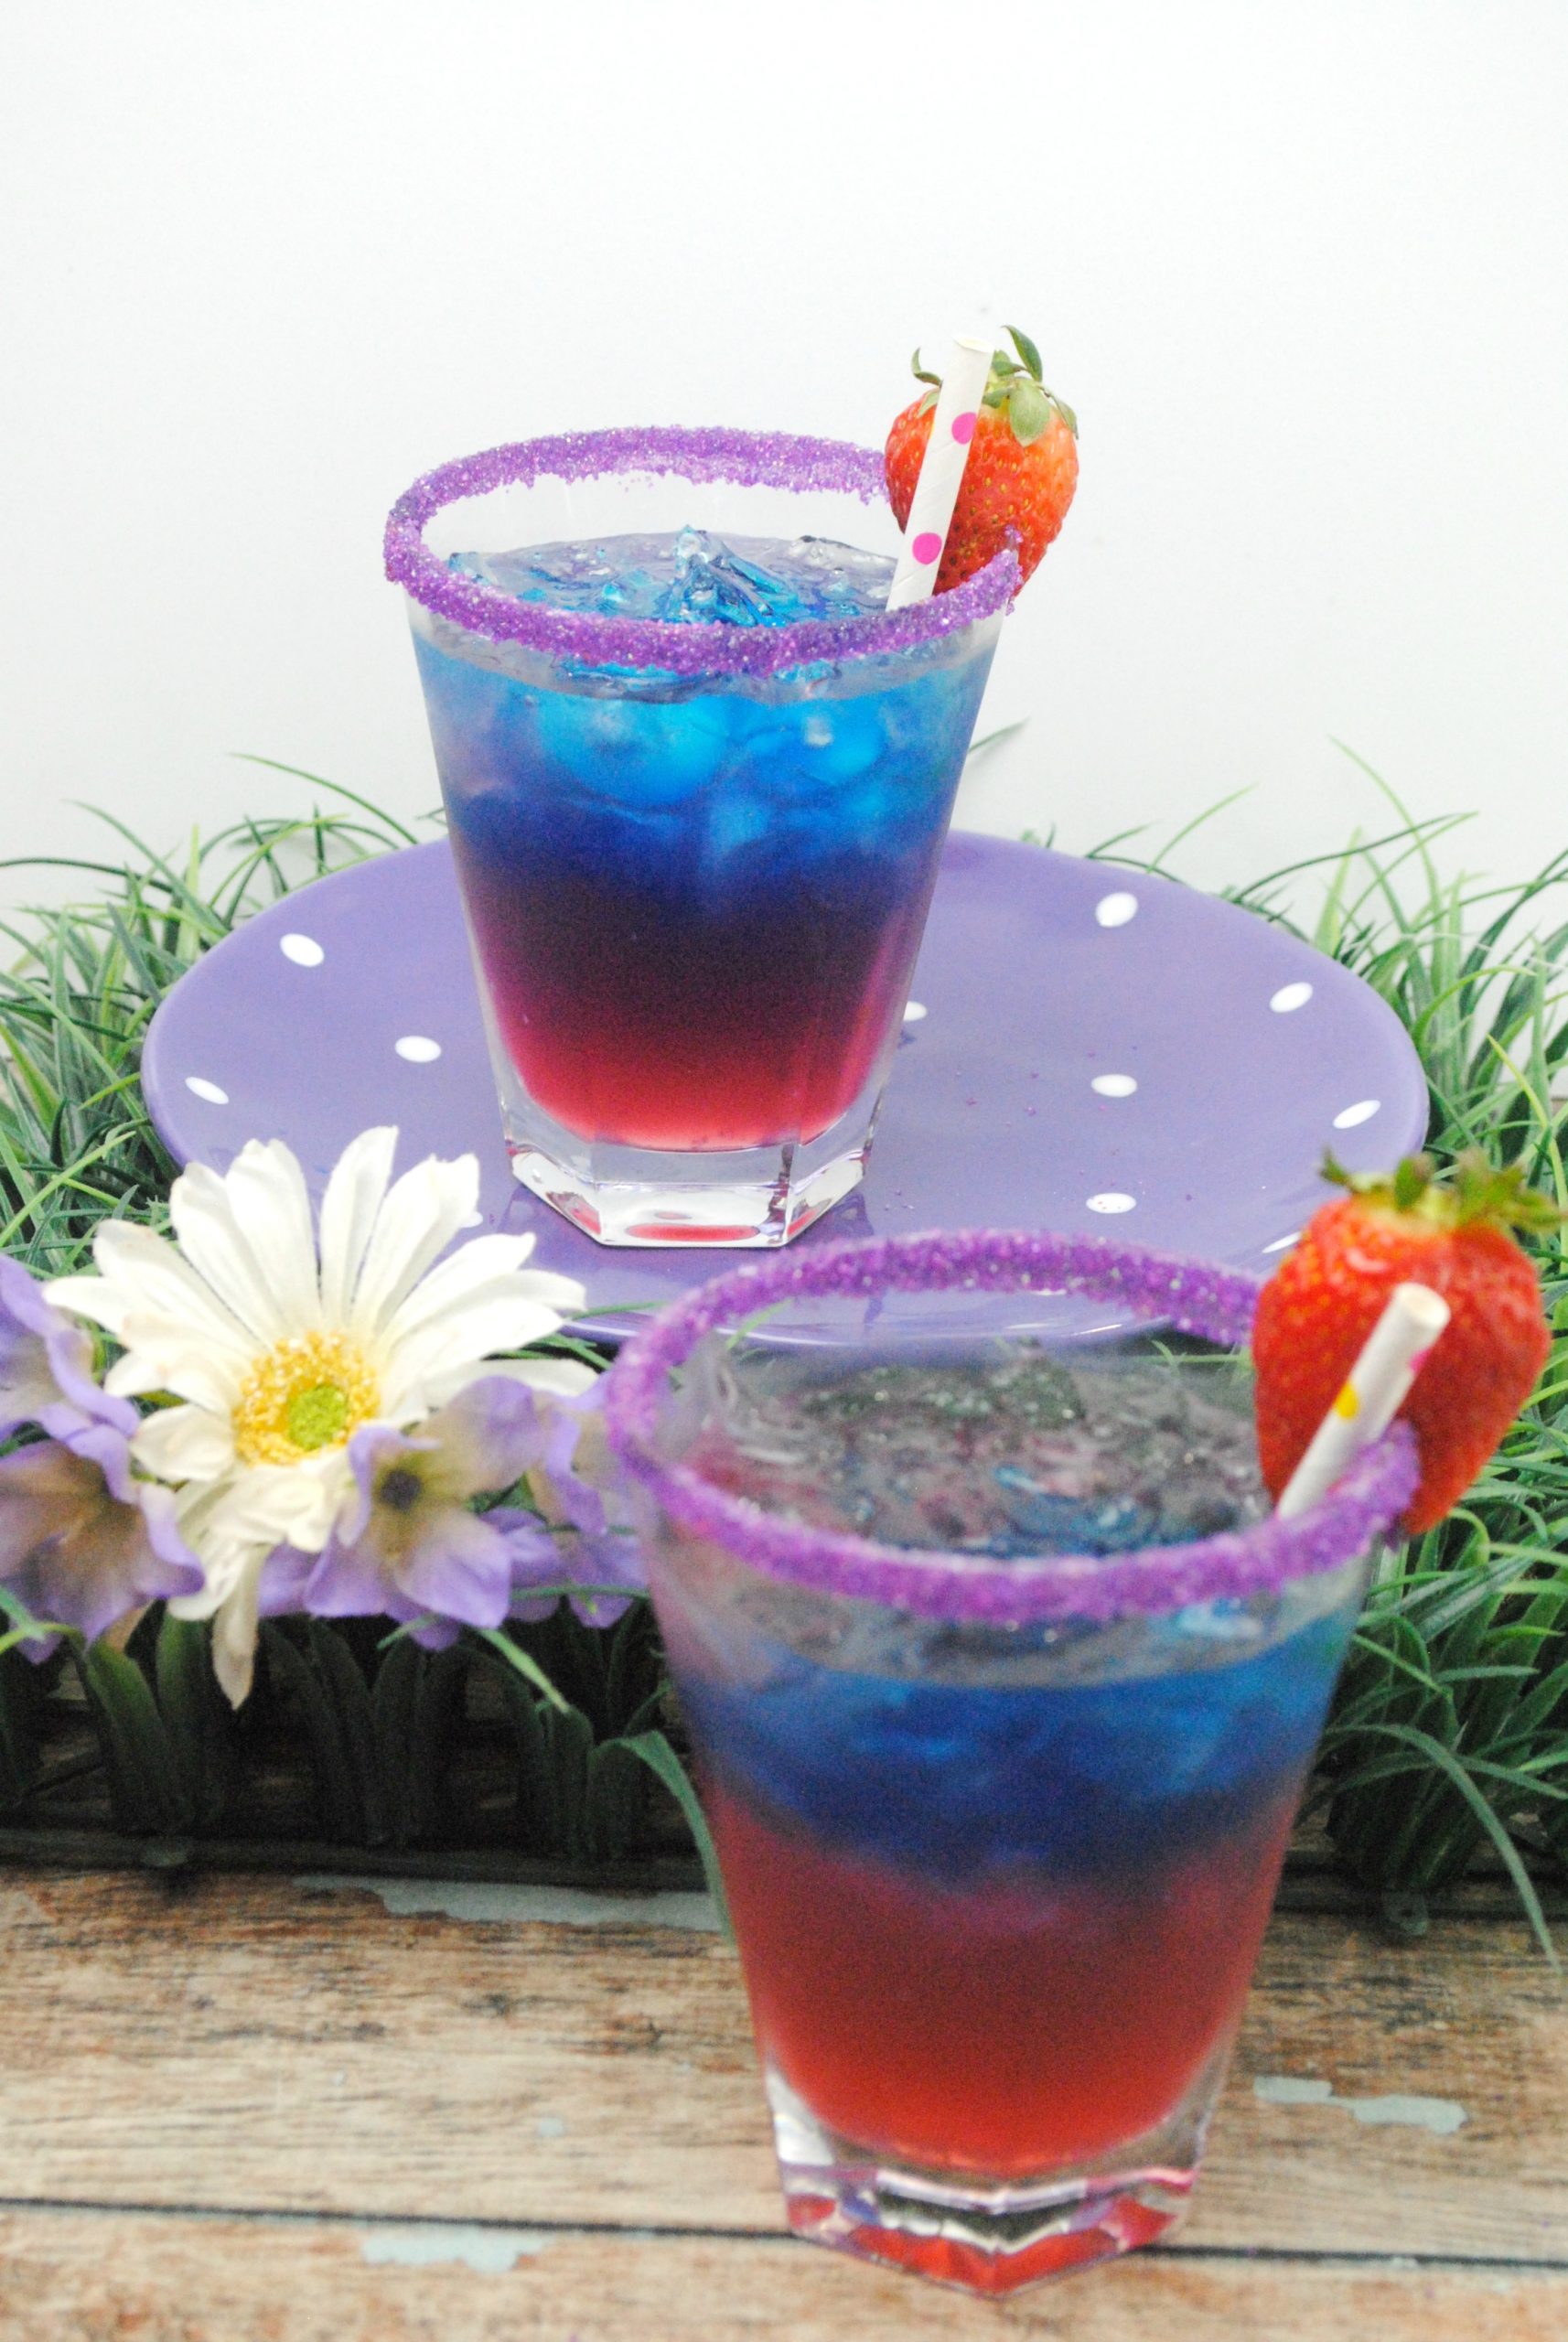 The Best Alice in Wonderland Cheshire Cat Inspired Cocktail Recipe